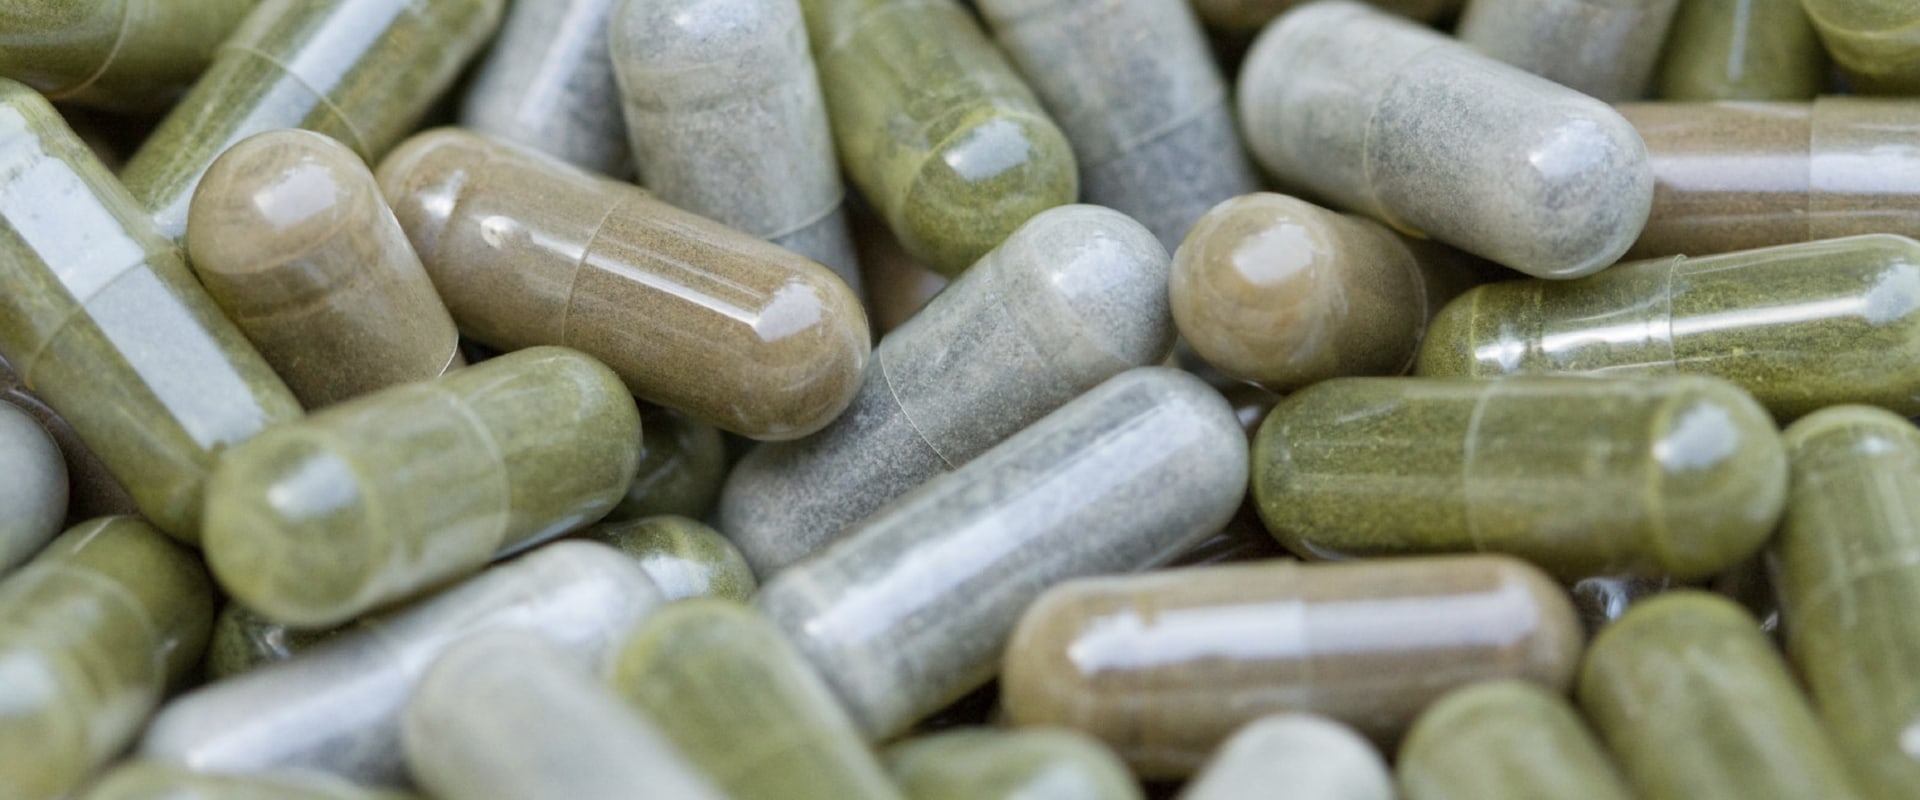 Are There Any Risks to Taking Health Supplements?